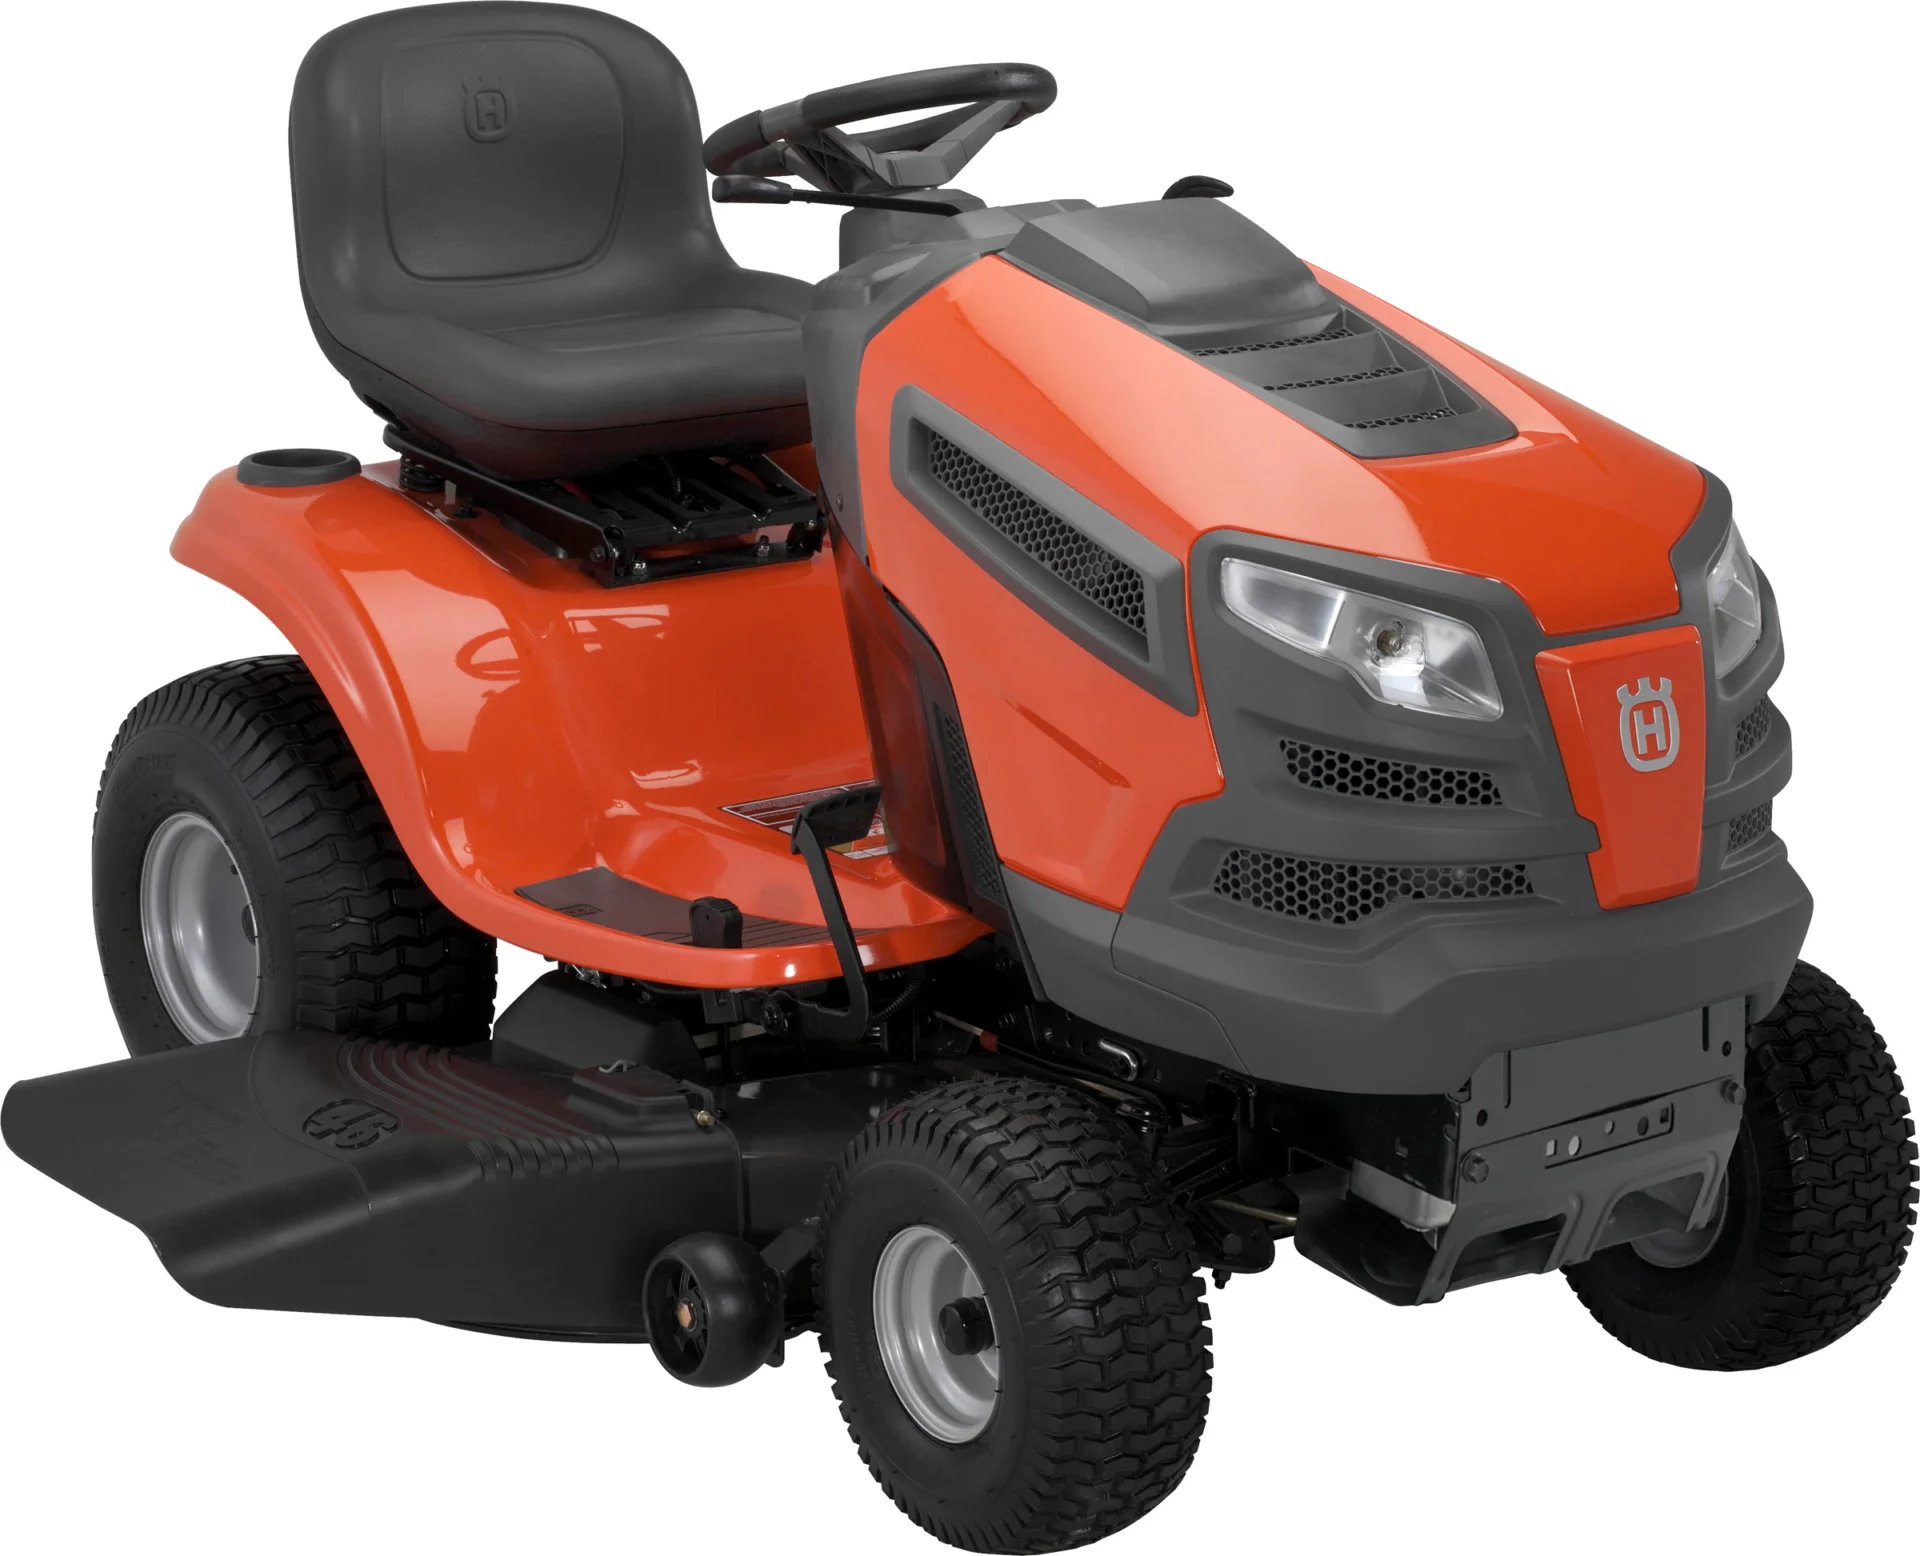 A red lawn mower with black wheels and seat.